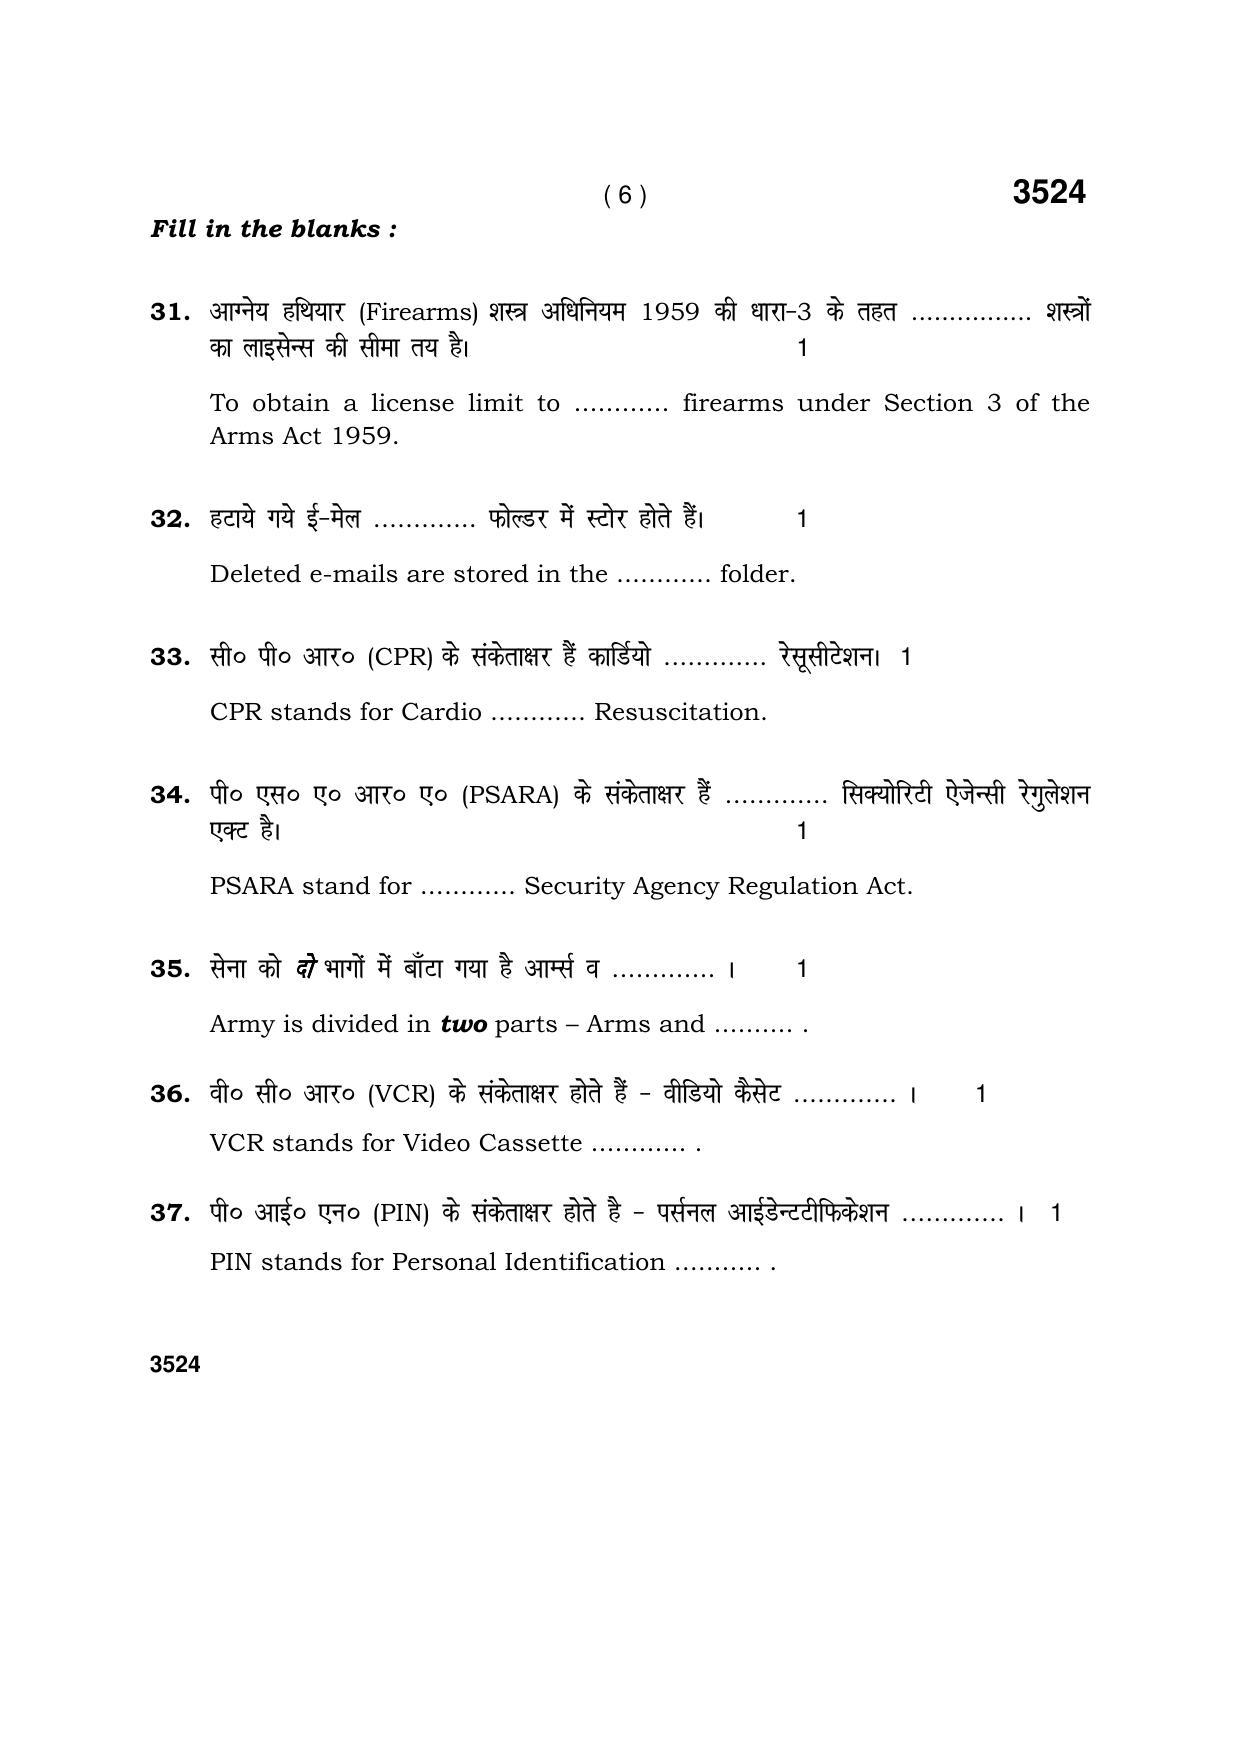 Haryana Board HBSE Class 10 Security 2018 Question Paper - Page 6